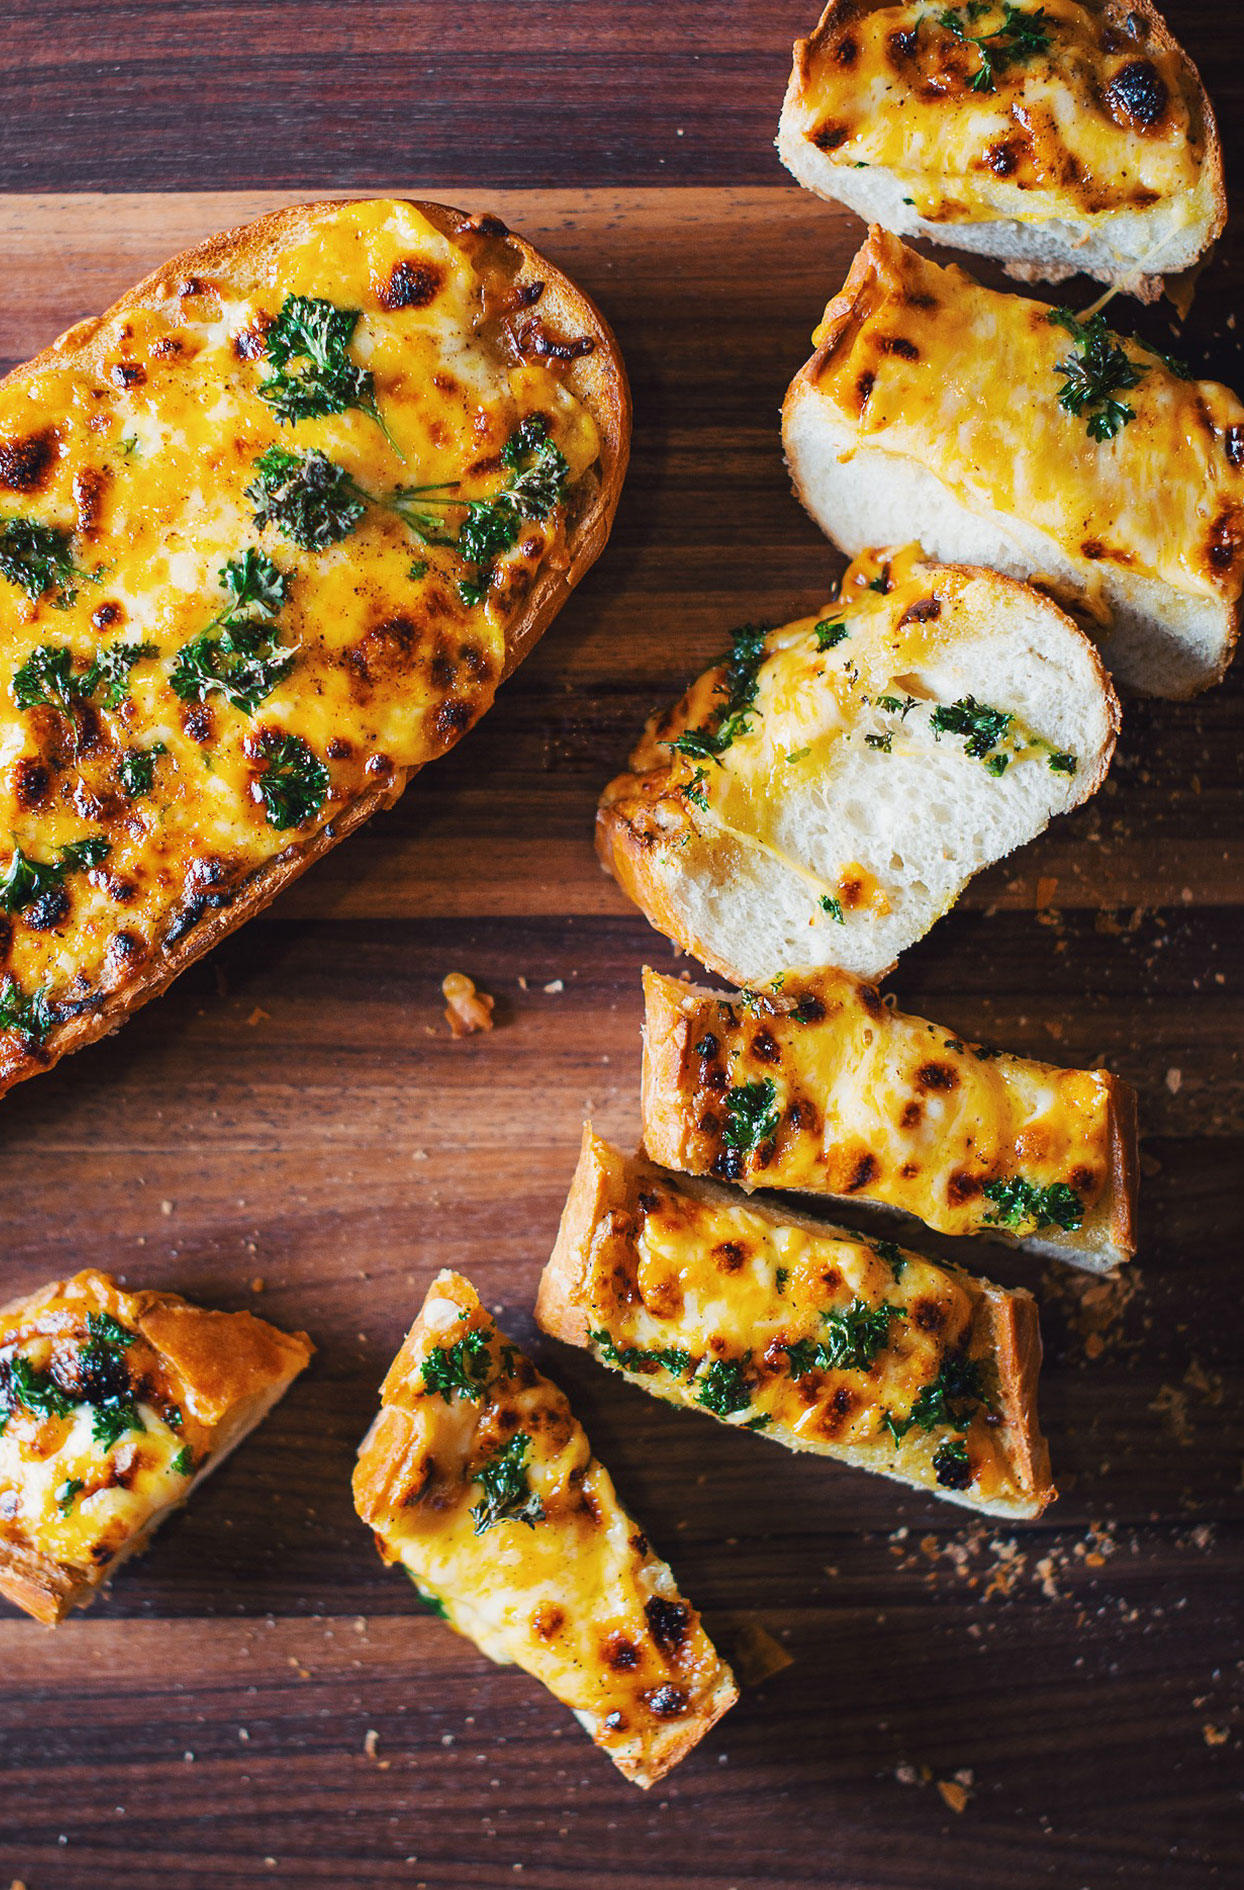 Crispy bread with cheese and honey